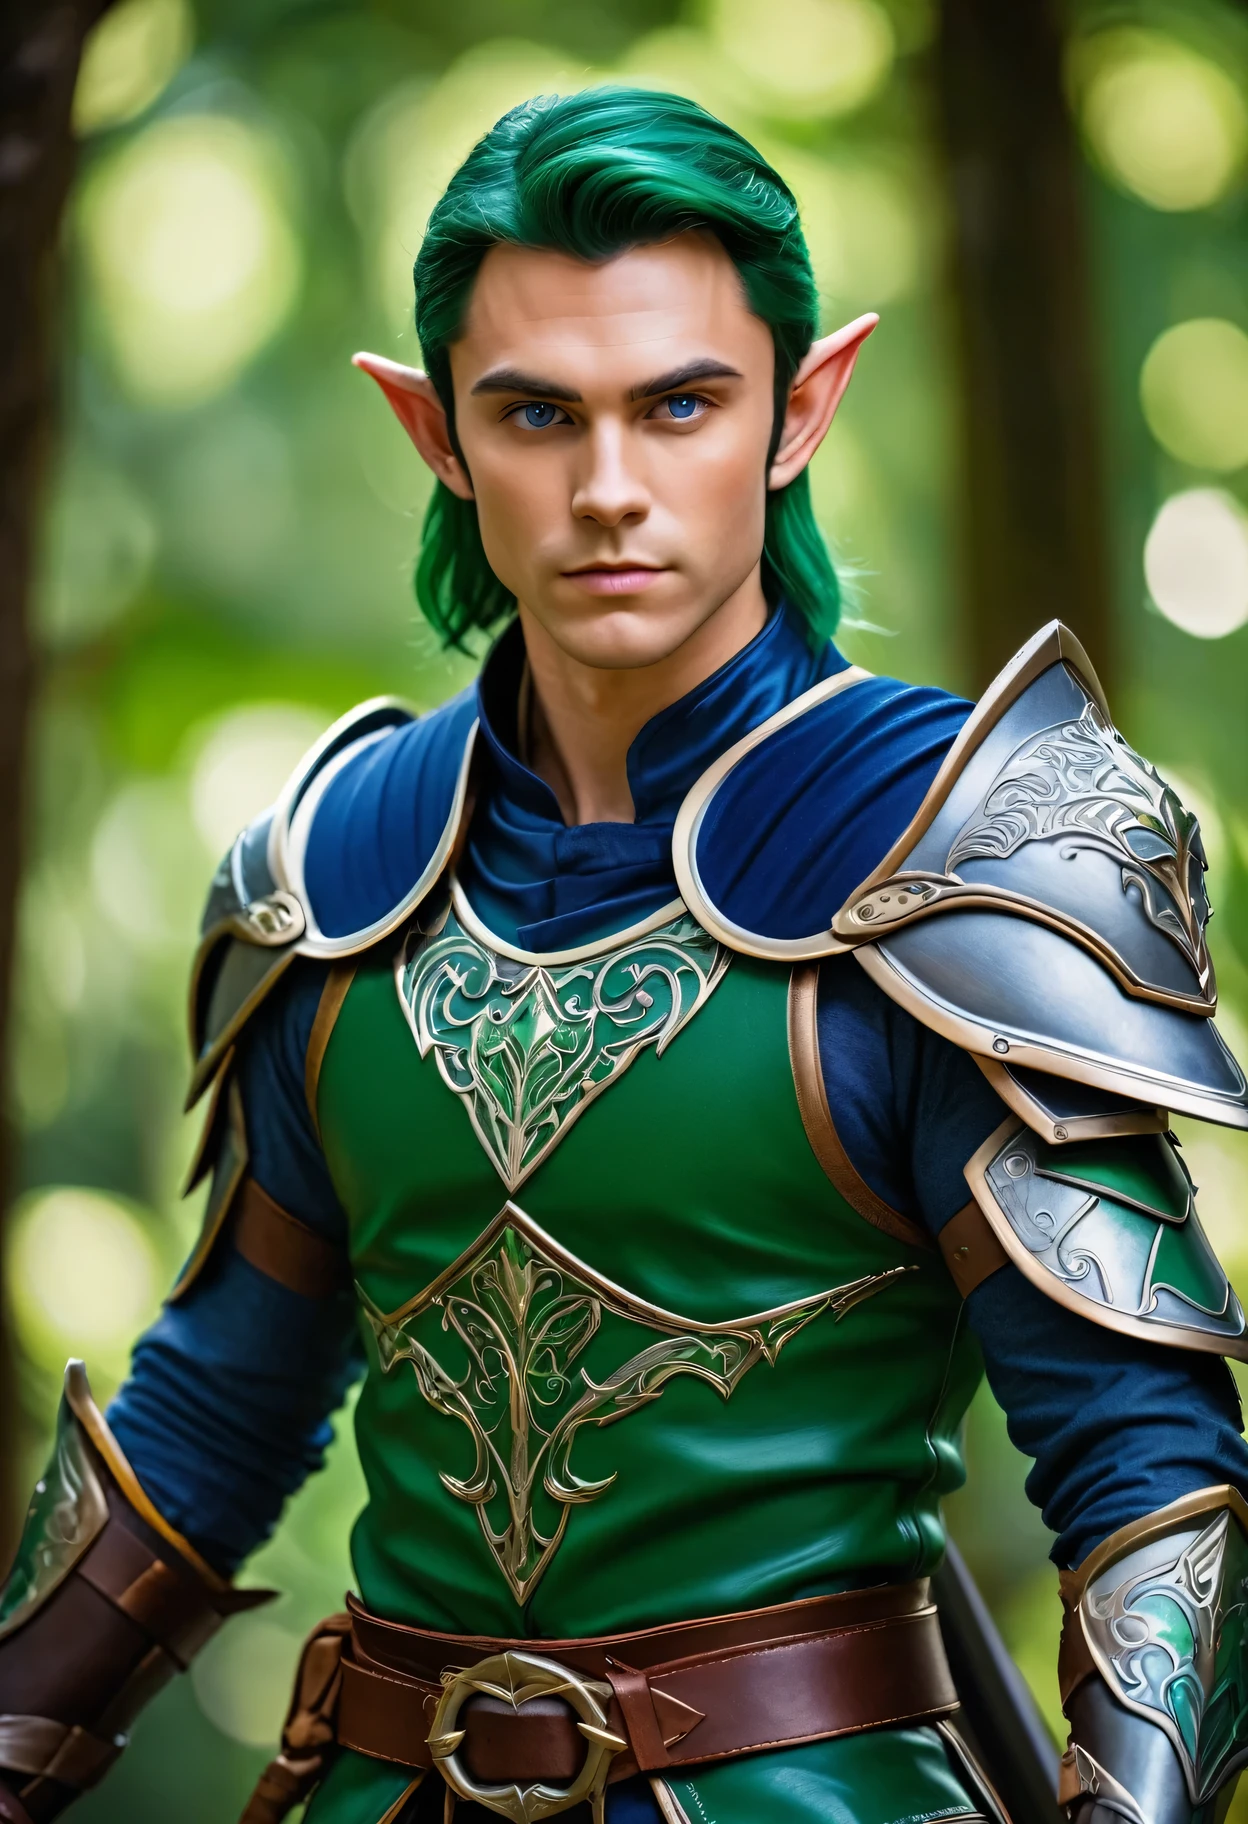 Professional photography for an elite magazine, An Elf warrior in gorgeous armor with intricate green painting, An Elf warrior posing, an elf blade made of blue steel in his hand, an Elf warrior looking at the viewer, full pose, full body, swordsman's fighting stance, slightly squinting eyes, Canon EOS R5 camera with Canon RF 100-500 lens mm F4.5-7.1L IS USM, 500 mm, 1/500 sec., f/7.1 and ISO 1000.